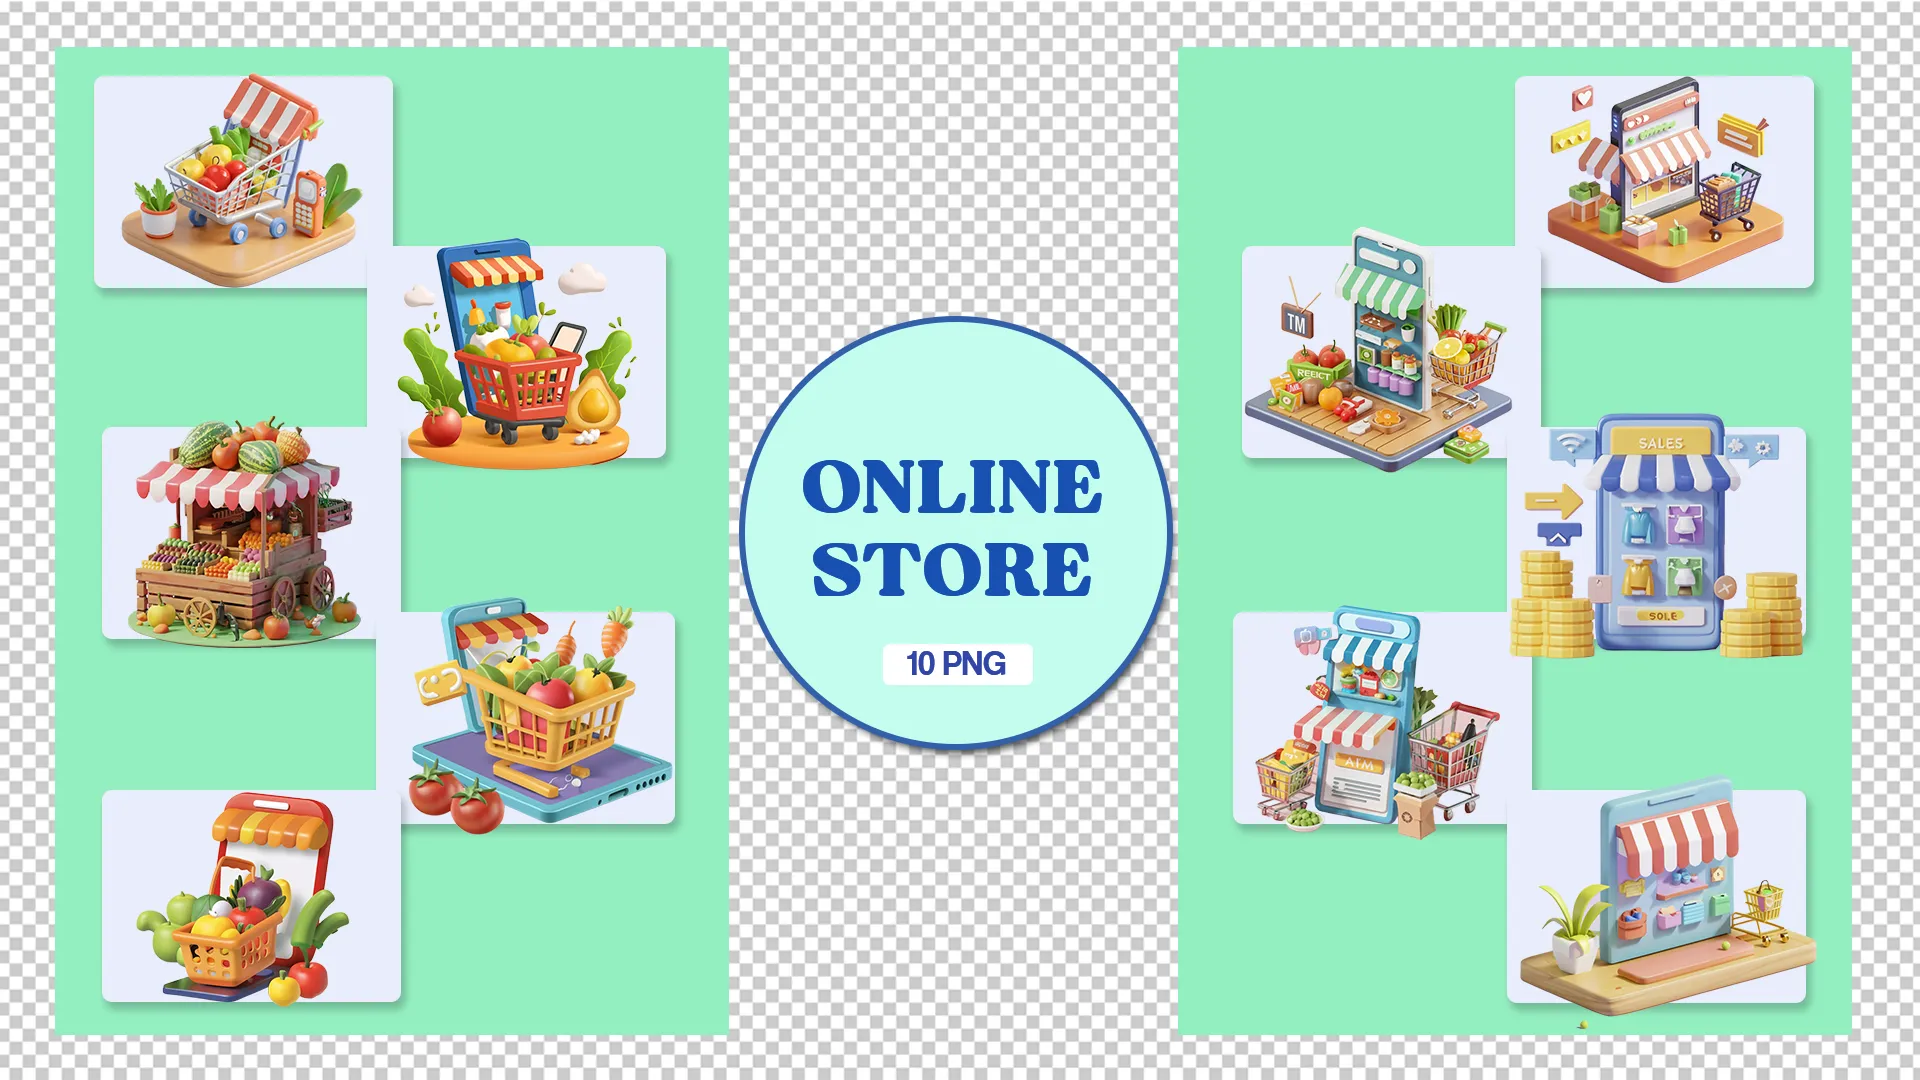 Digital Marketplace 3D Pack with Various Stores image